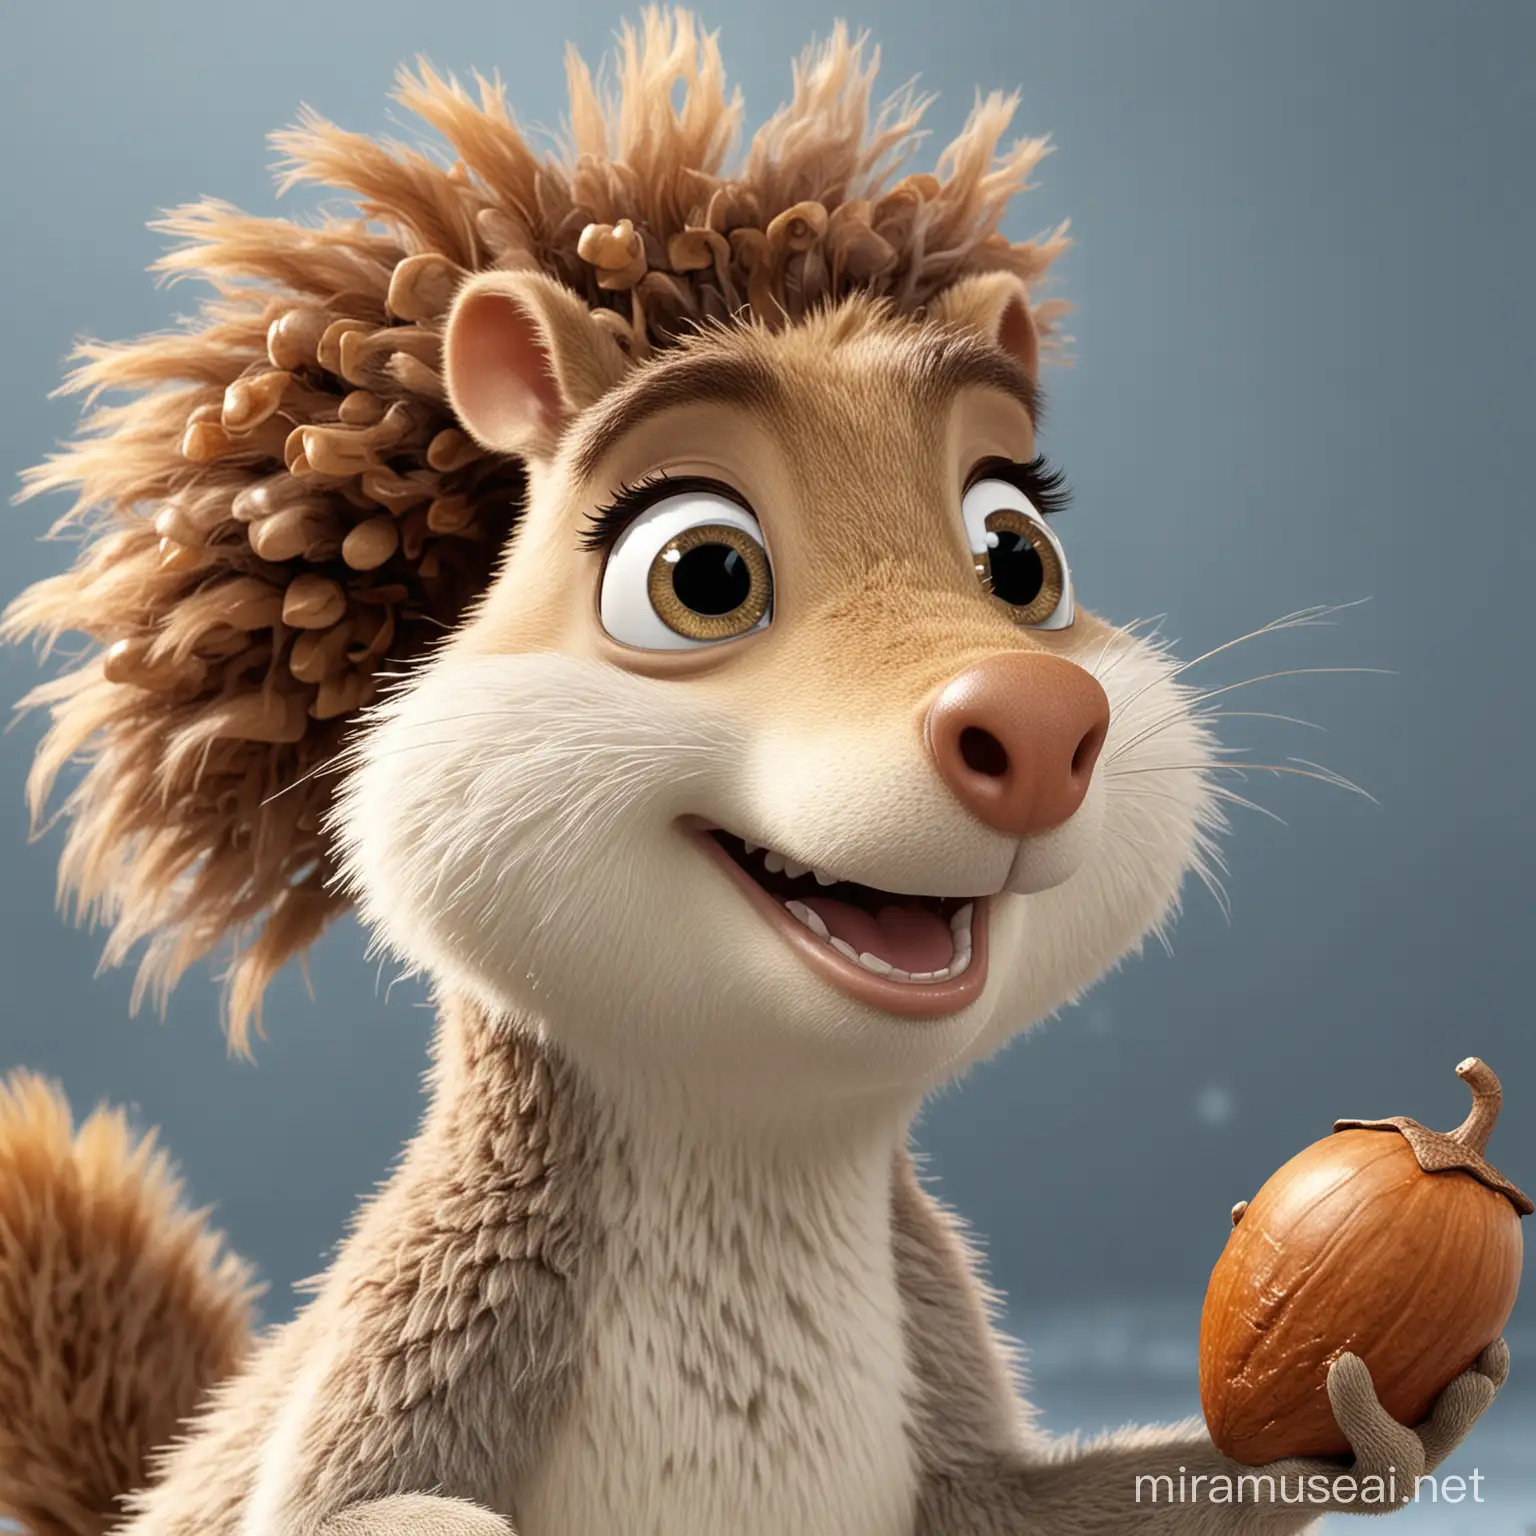 Scrat from Ice Age with curly female hair and holding an acorn
